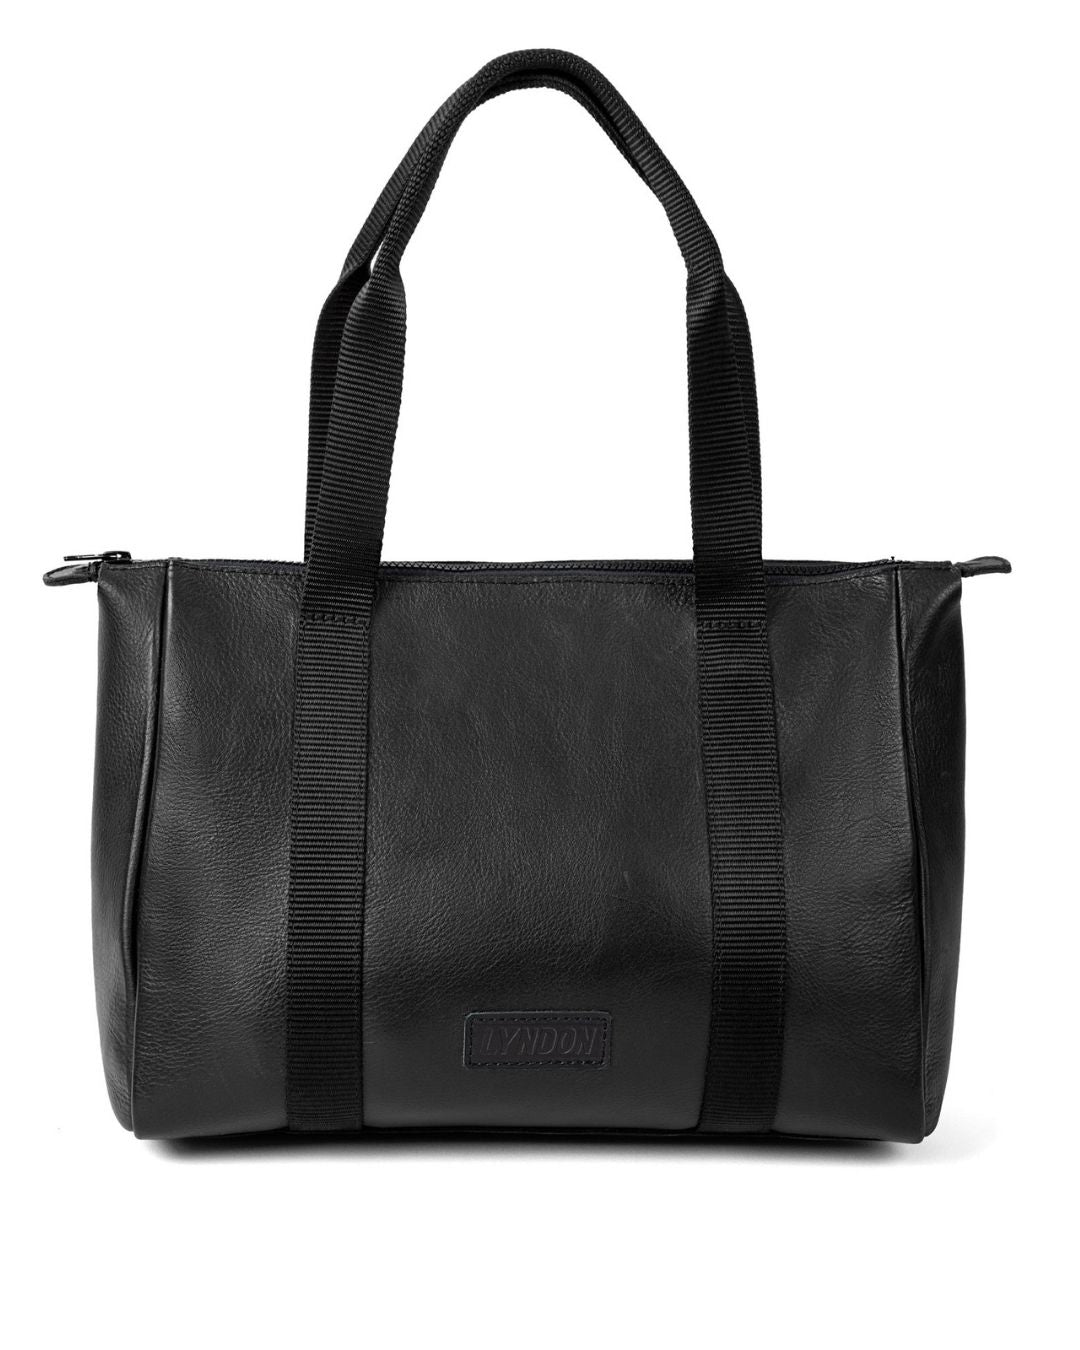 Amazing Leather Tote